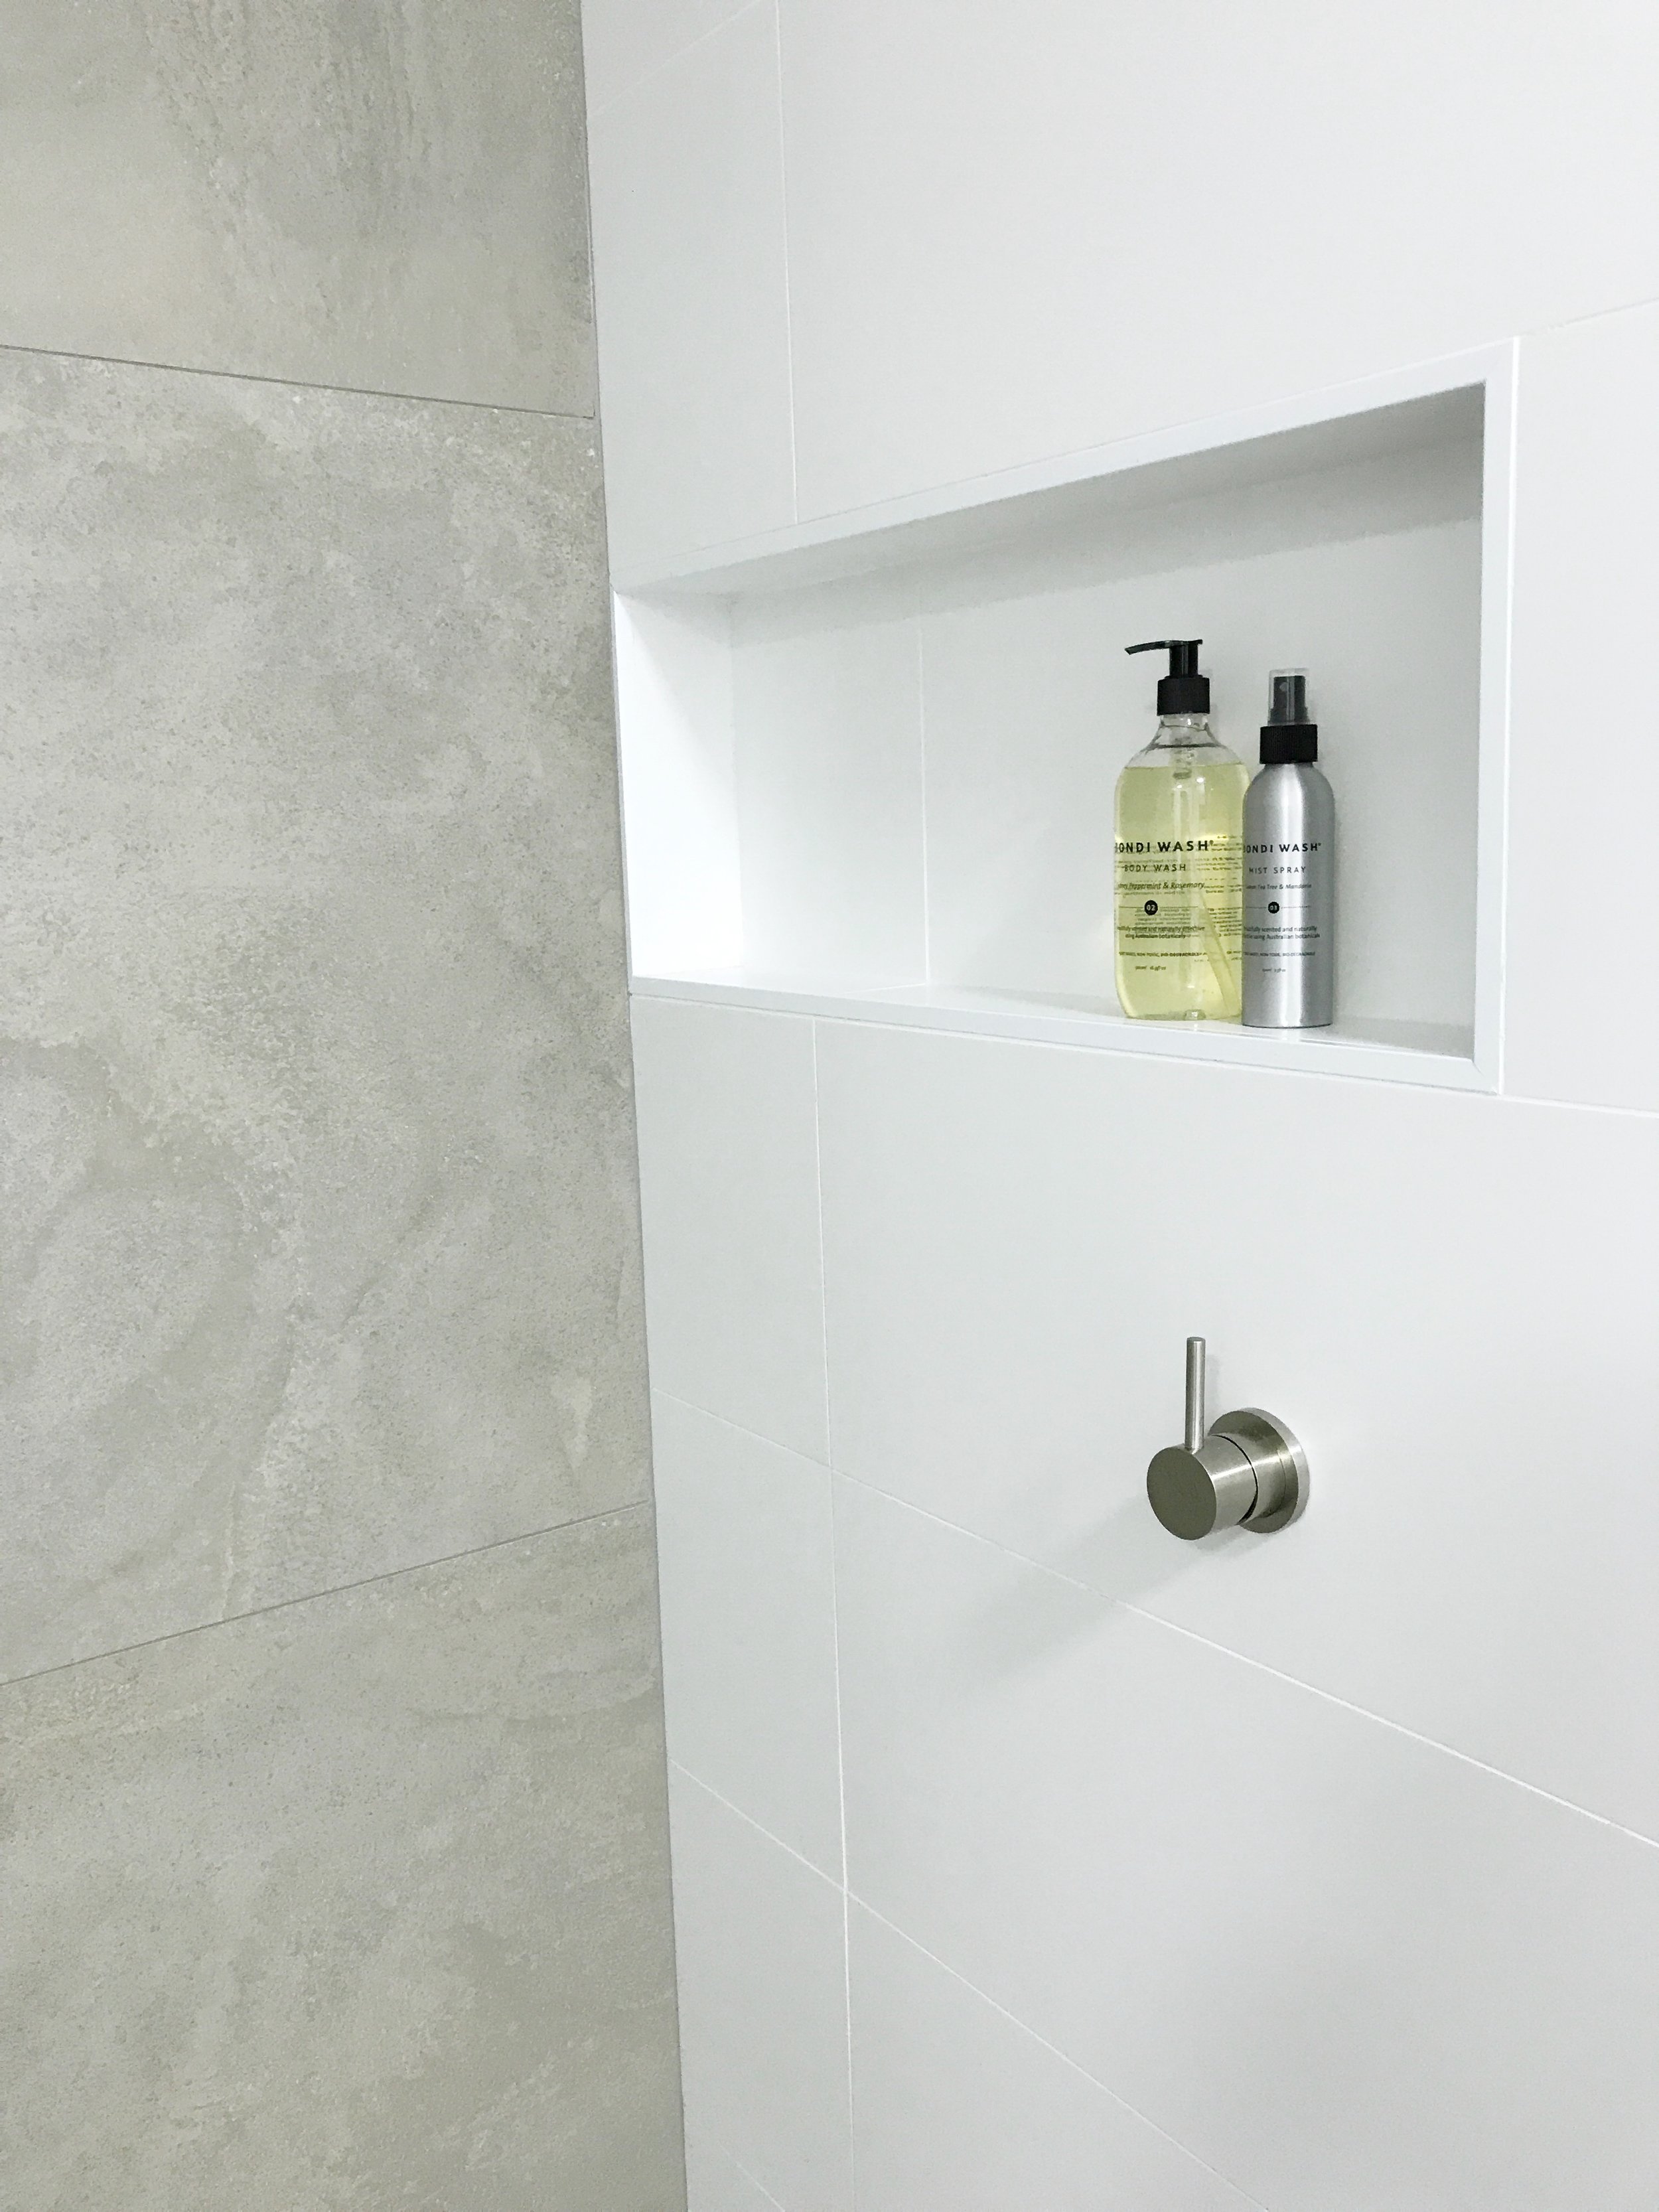 The Top 10 Bathroom Renovation Mistakes, How To Tile A Shower Niche Without Trim